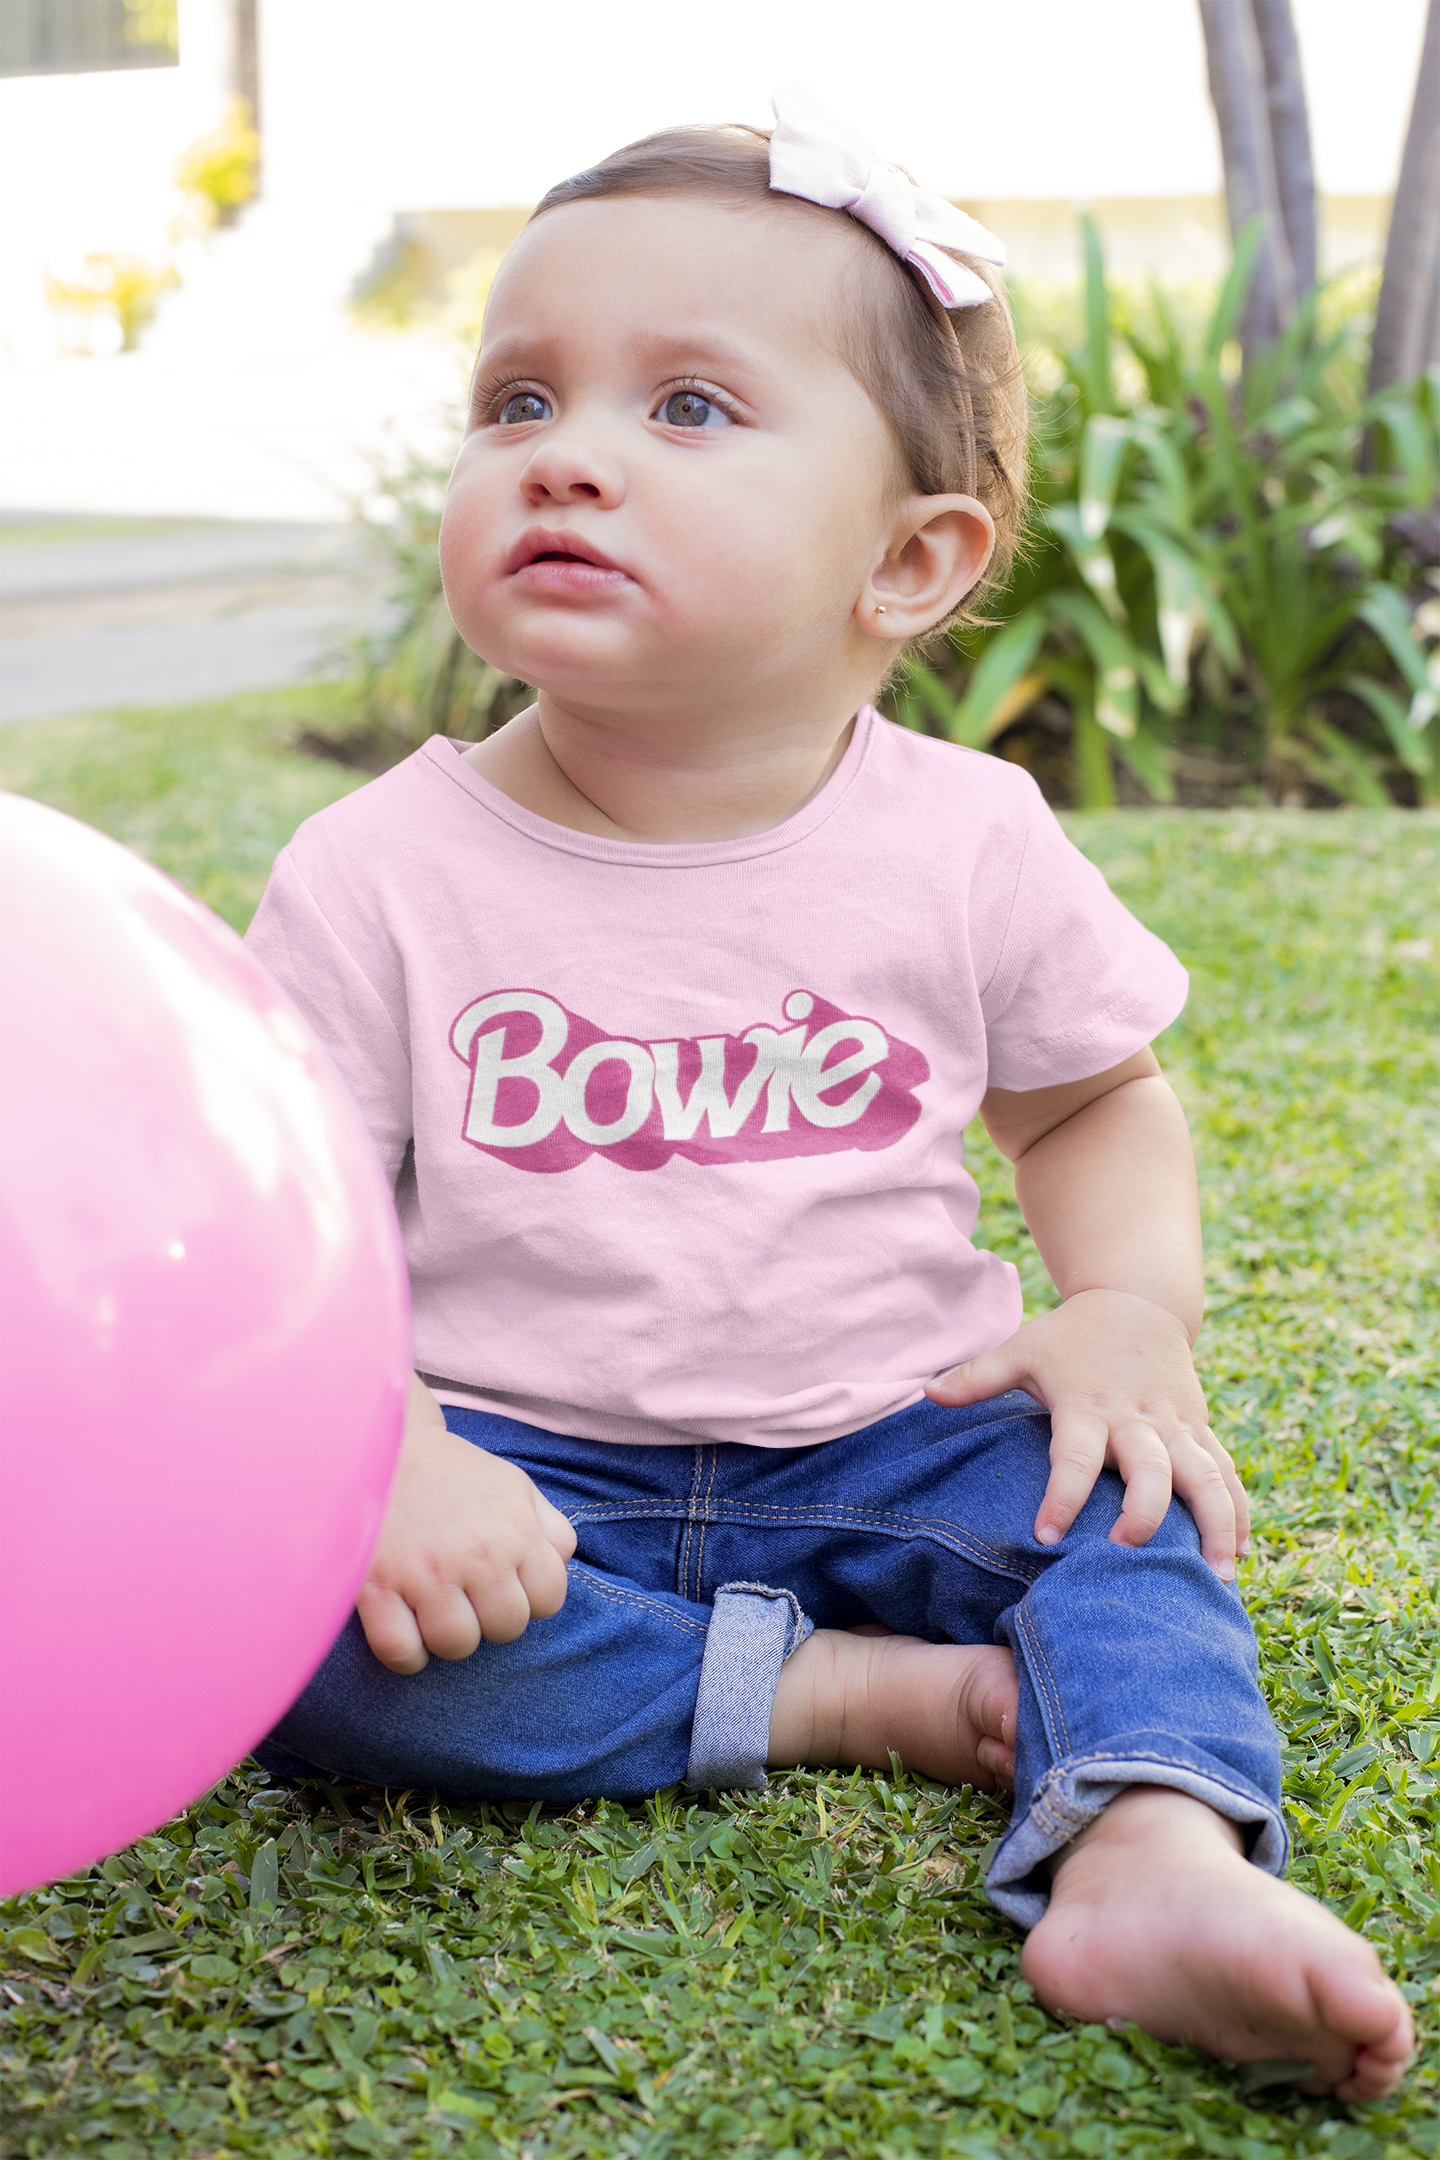 Bowie (famous doll font) Printed Baby Jersey Short Sleeve Tee